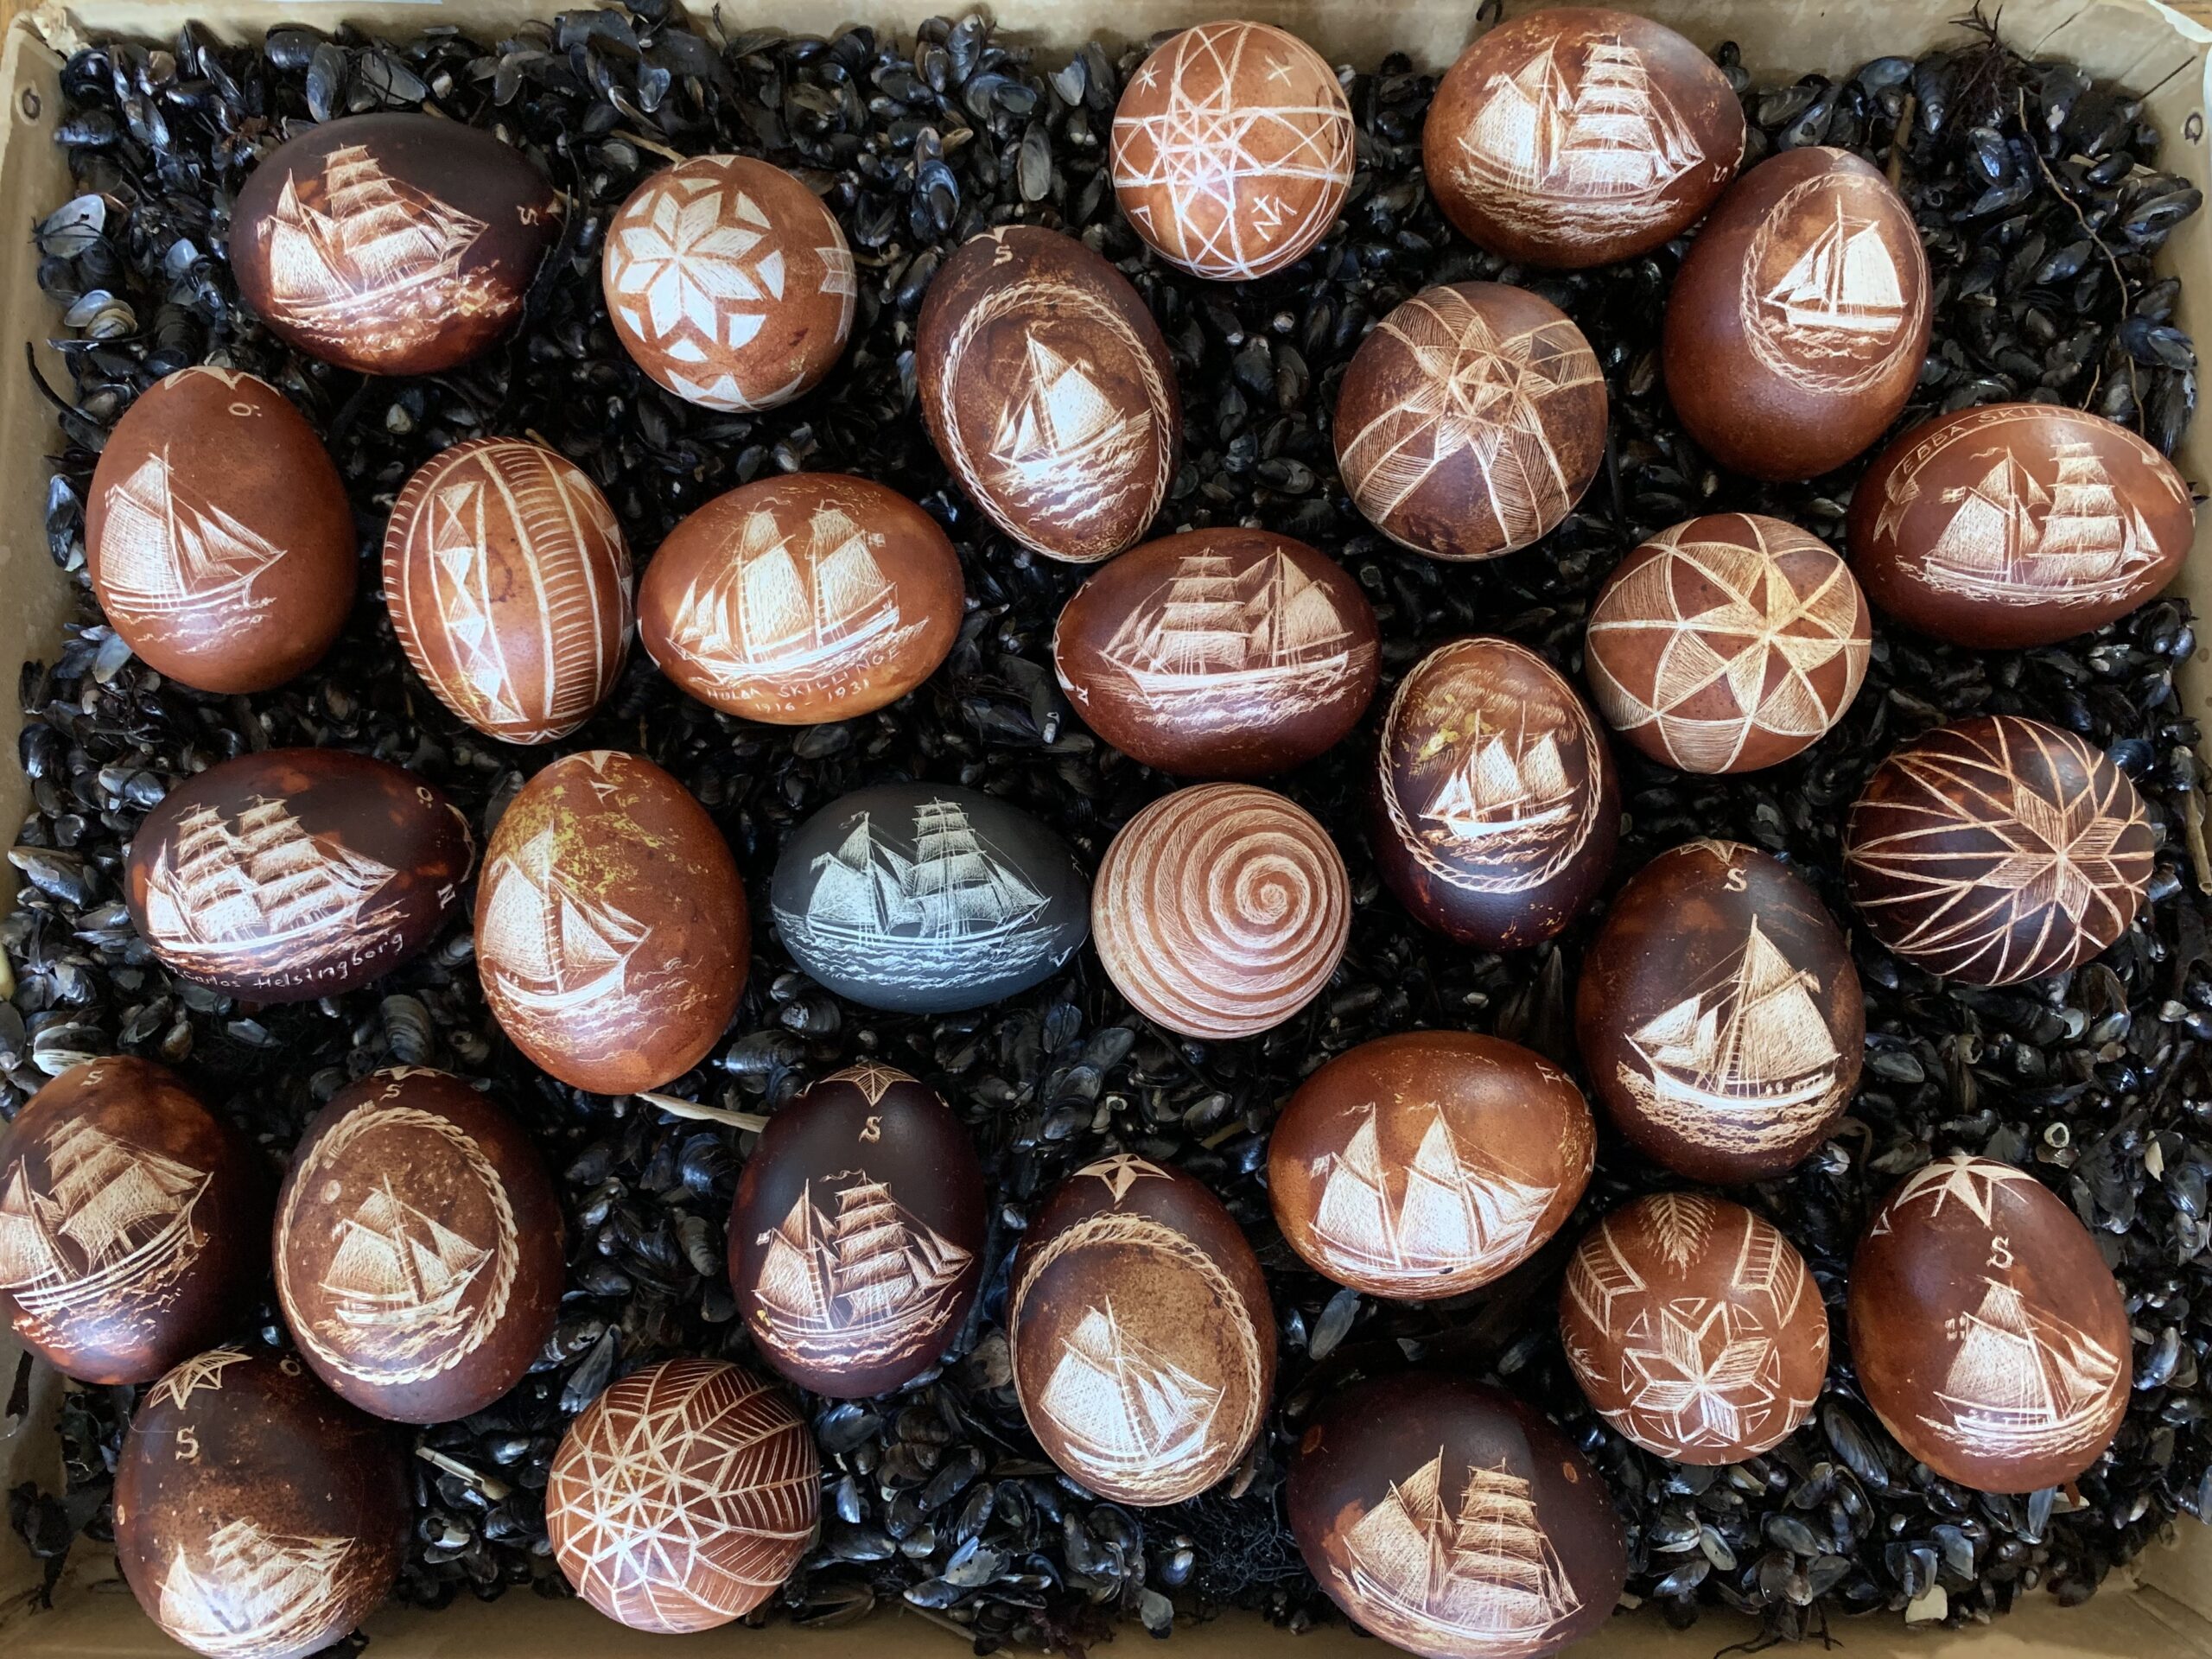 Carved eggs with ship motifs by Maria Lancing